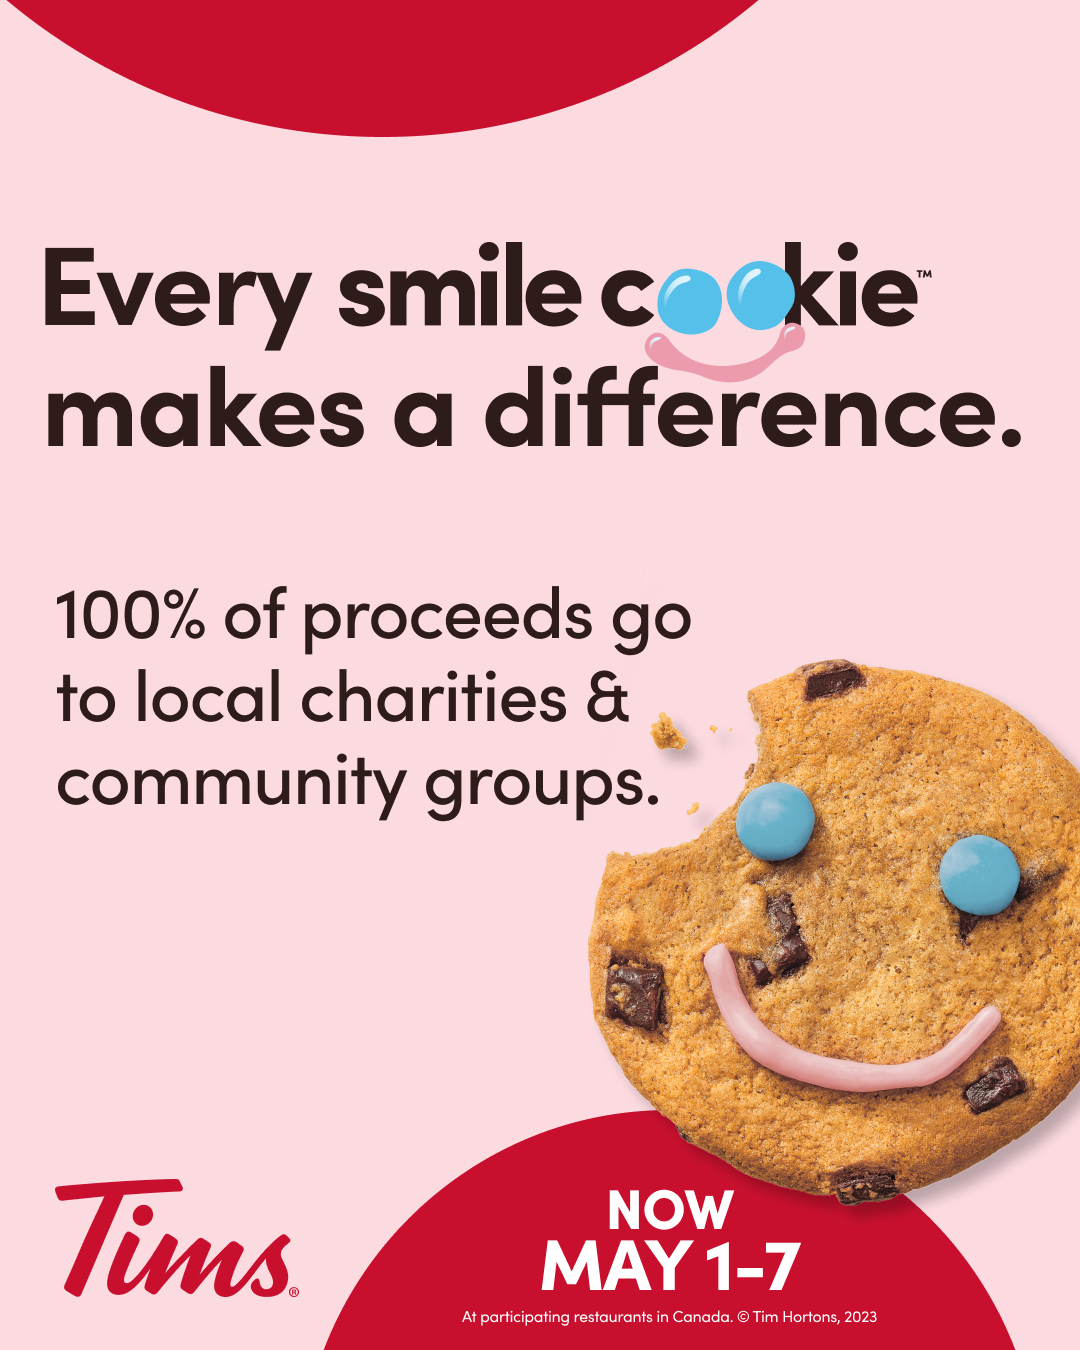 Bradford Tim Hortons locations serving up Smiles for area group